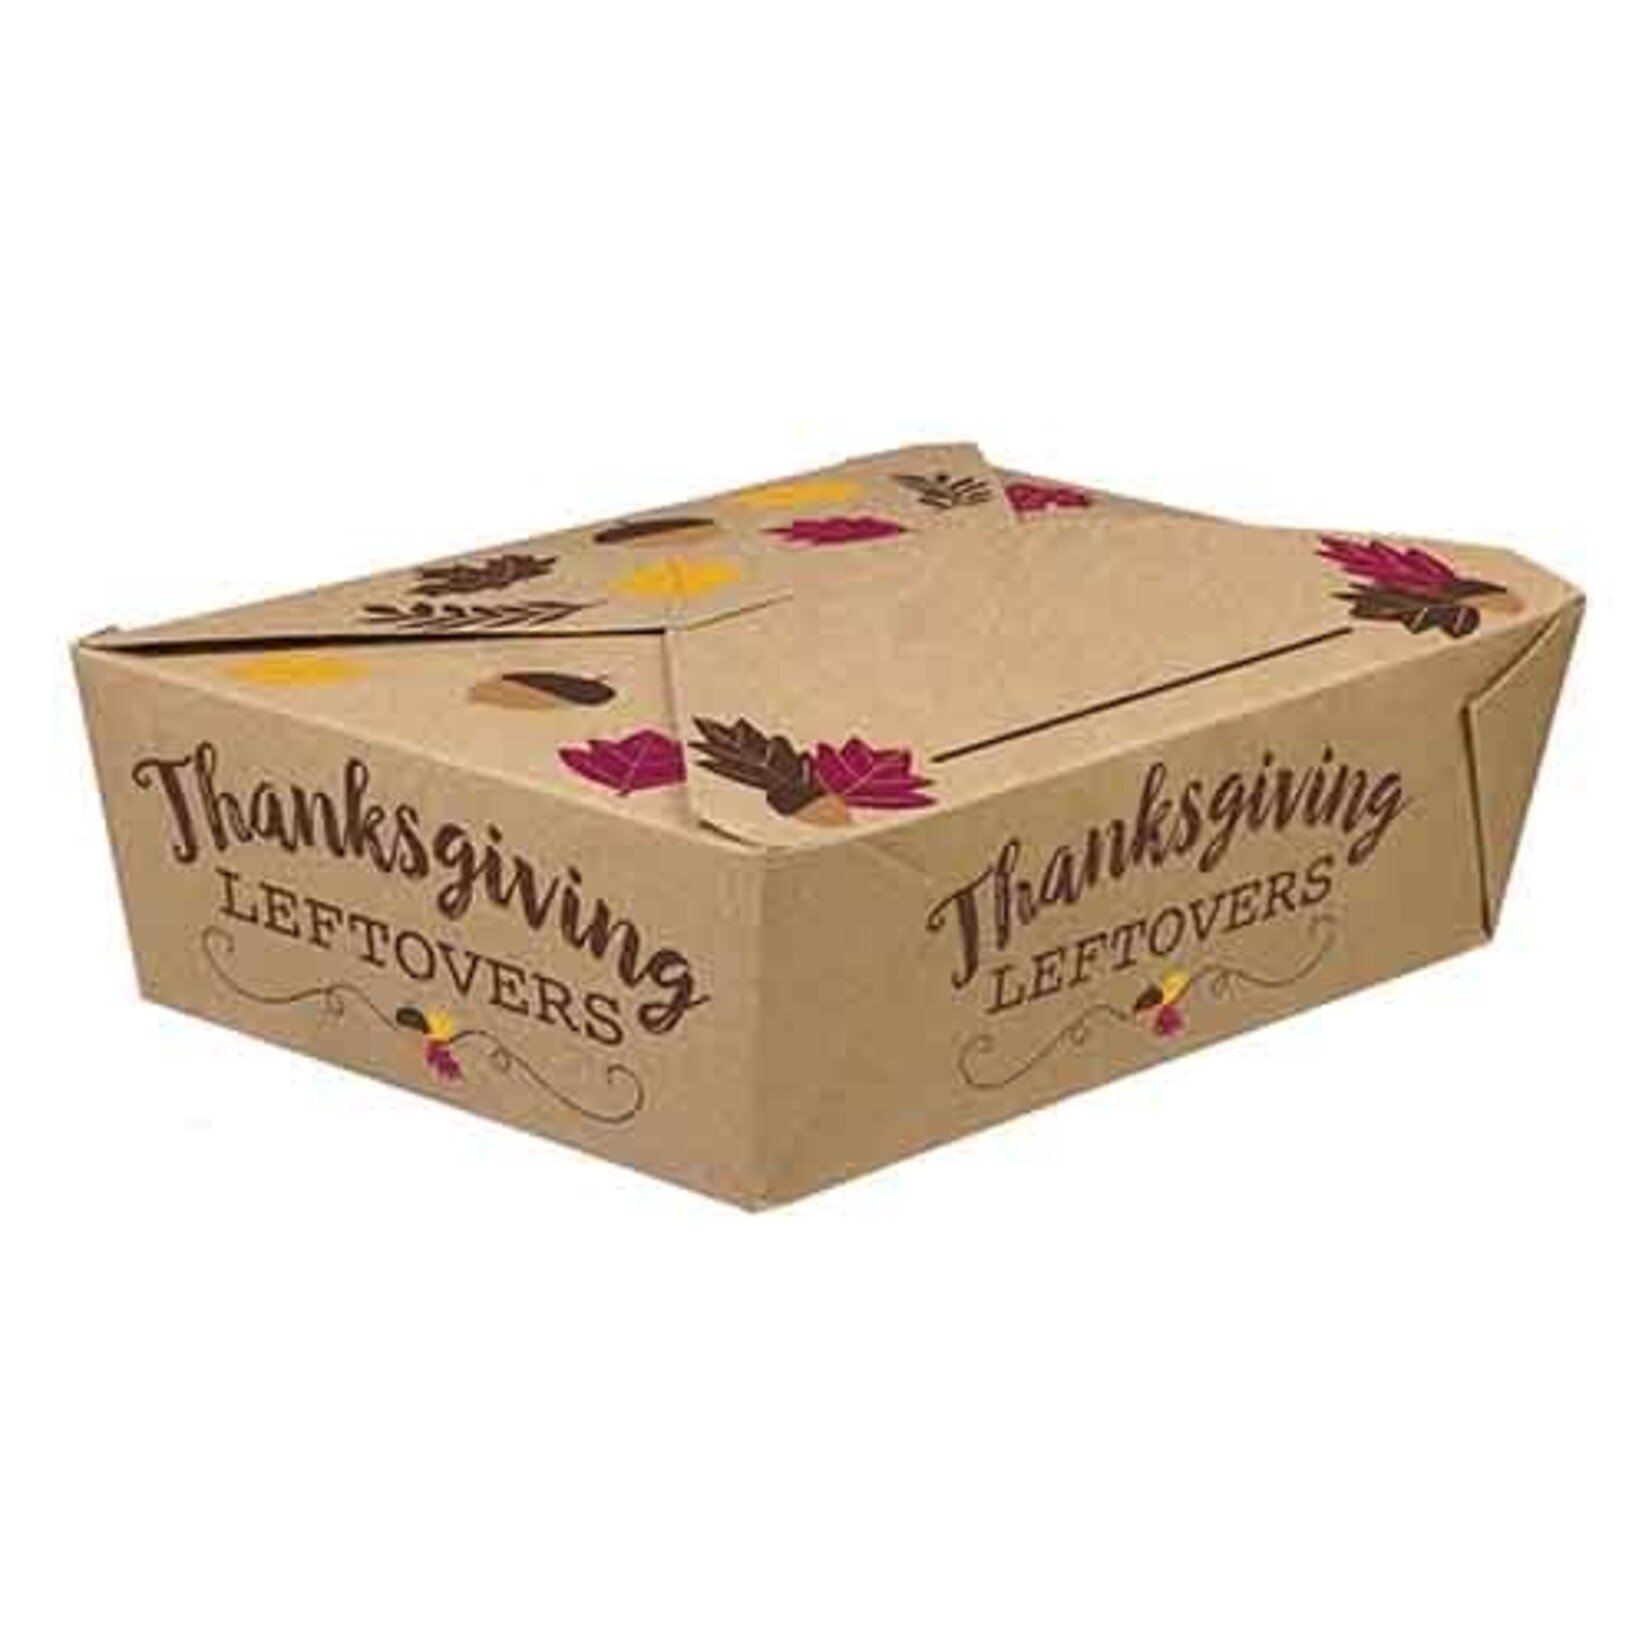 Amscan Thanksgiving Foldable To Go Boxes - 5ct.